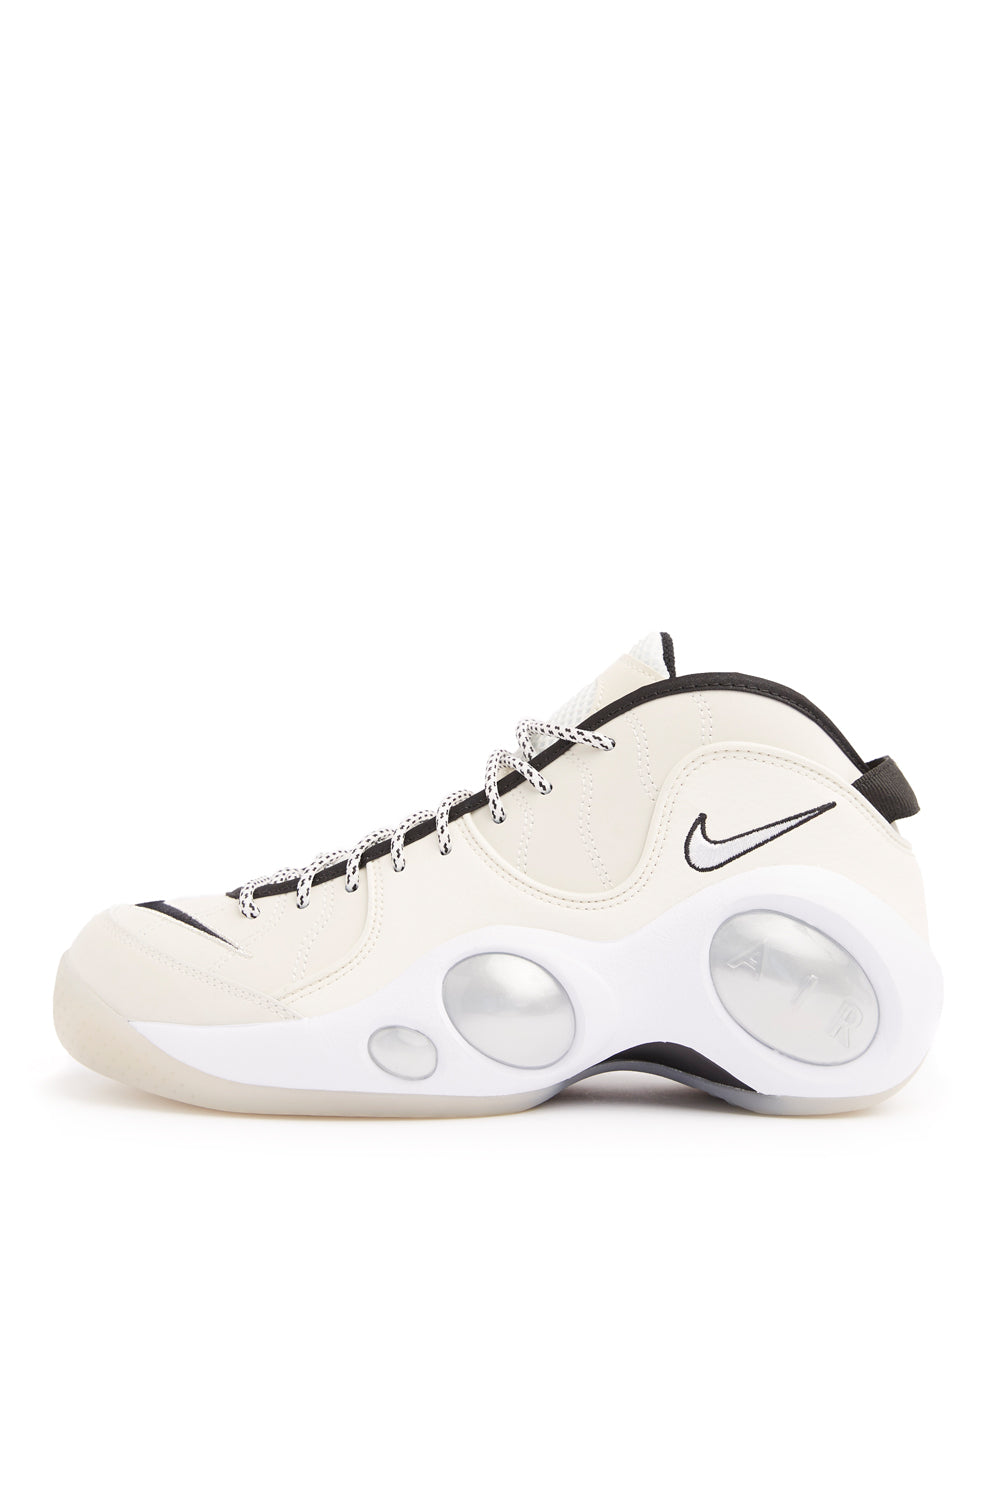 Nike Air Zoom 95 'Sail/White/Pale ROOTED